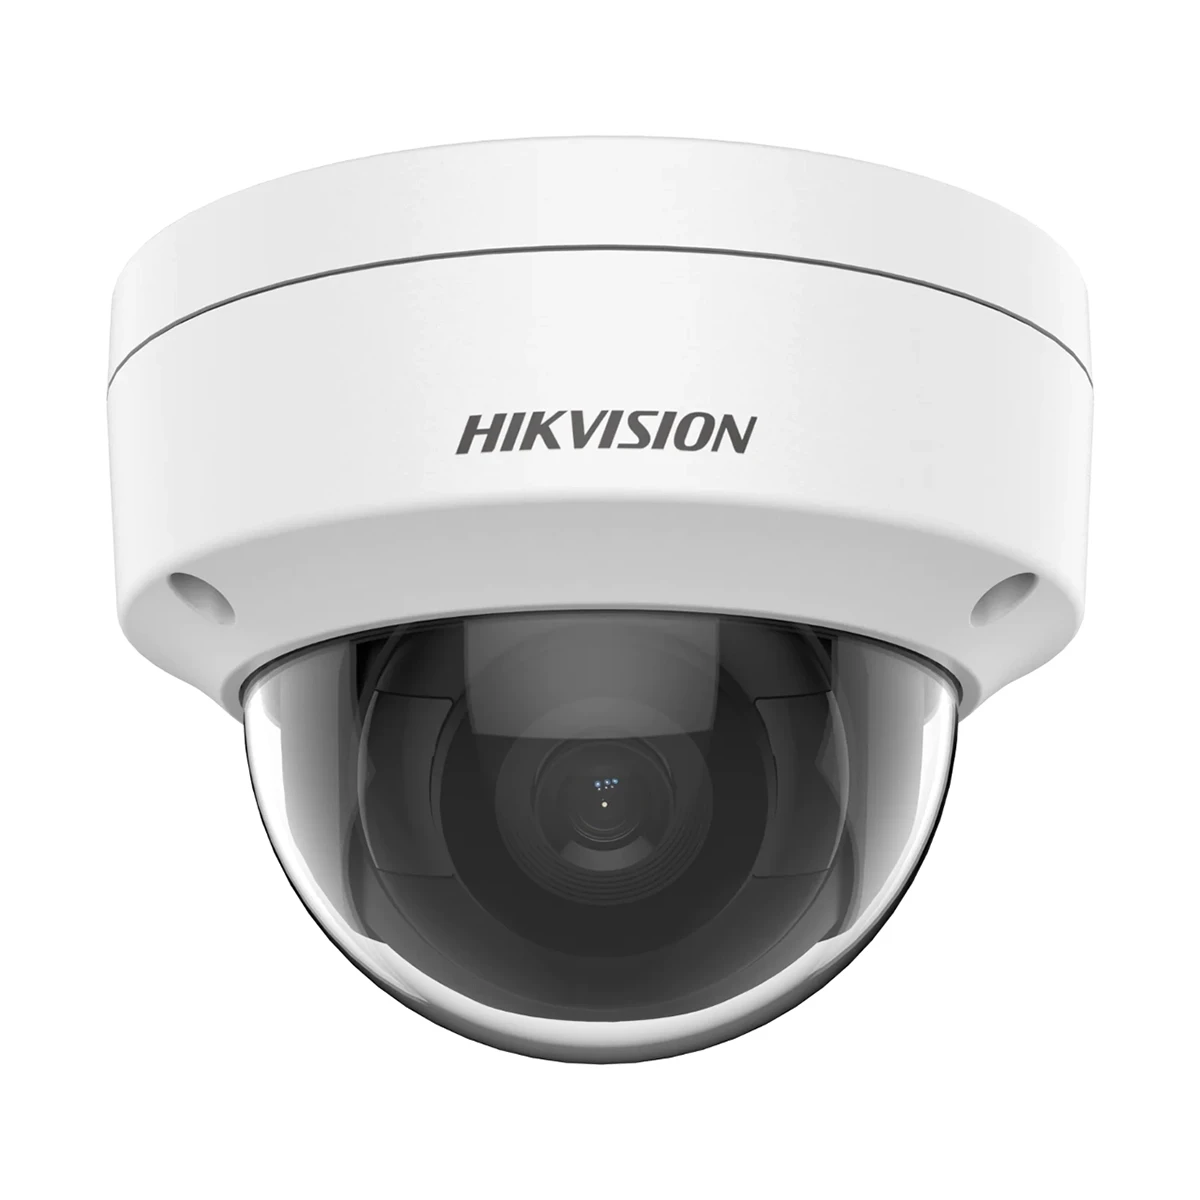 Hikvision DS-2CD1123G0E-I(2.8mm)(C)(O-STD), 2 MP Fixed Dome Network Camera, PoE,Support mobile monitoring via Hik-Connect